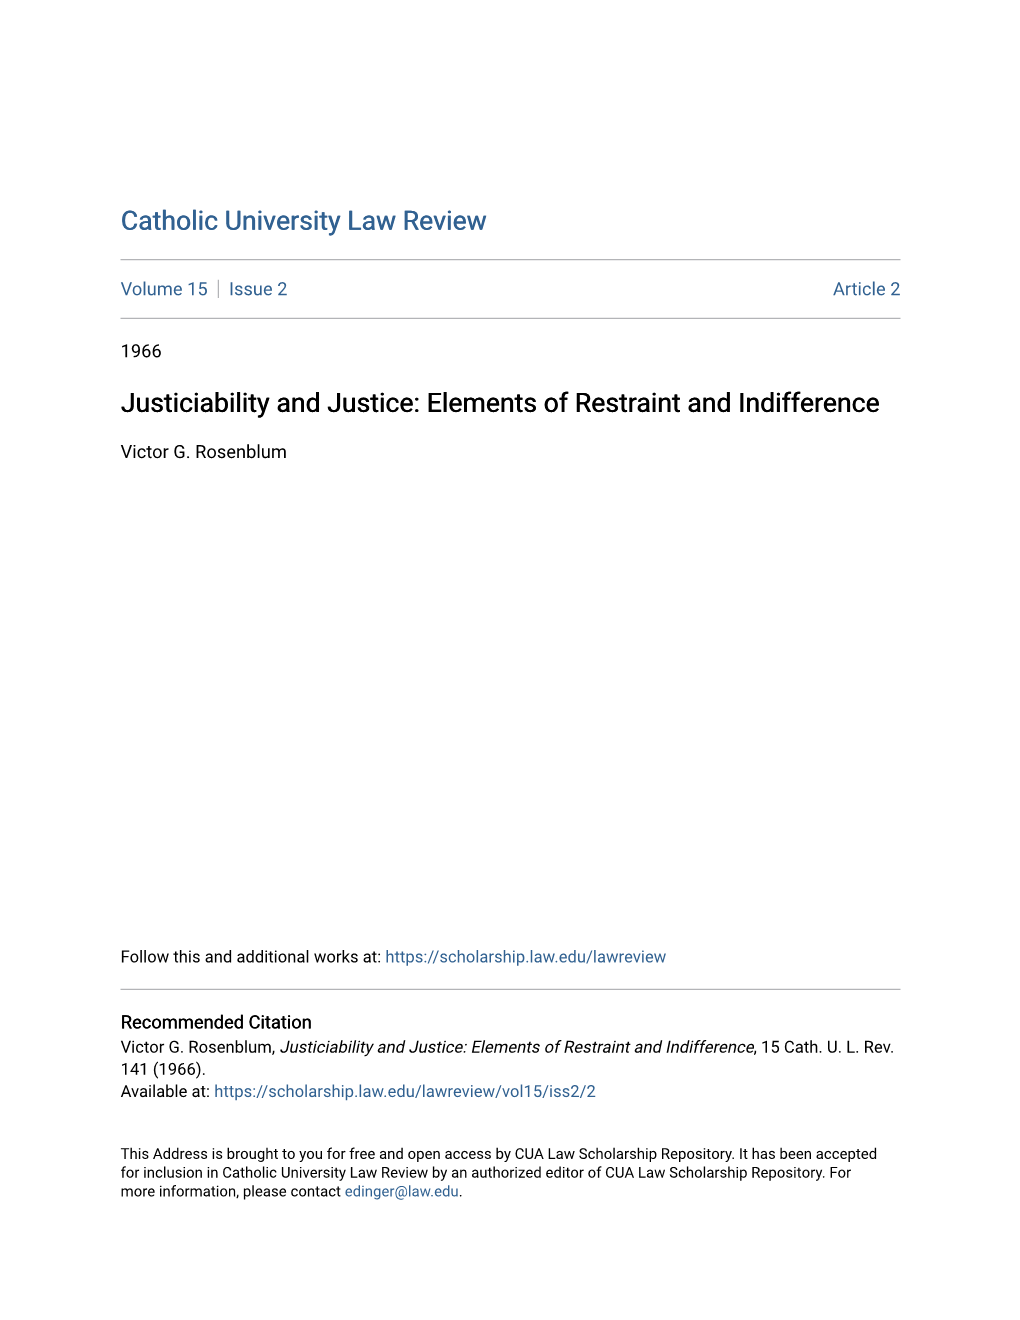 Justiciability and Justice: Elements of Restraint and Indifference